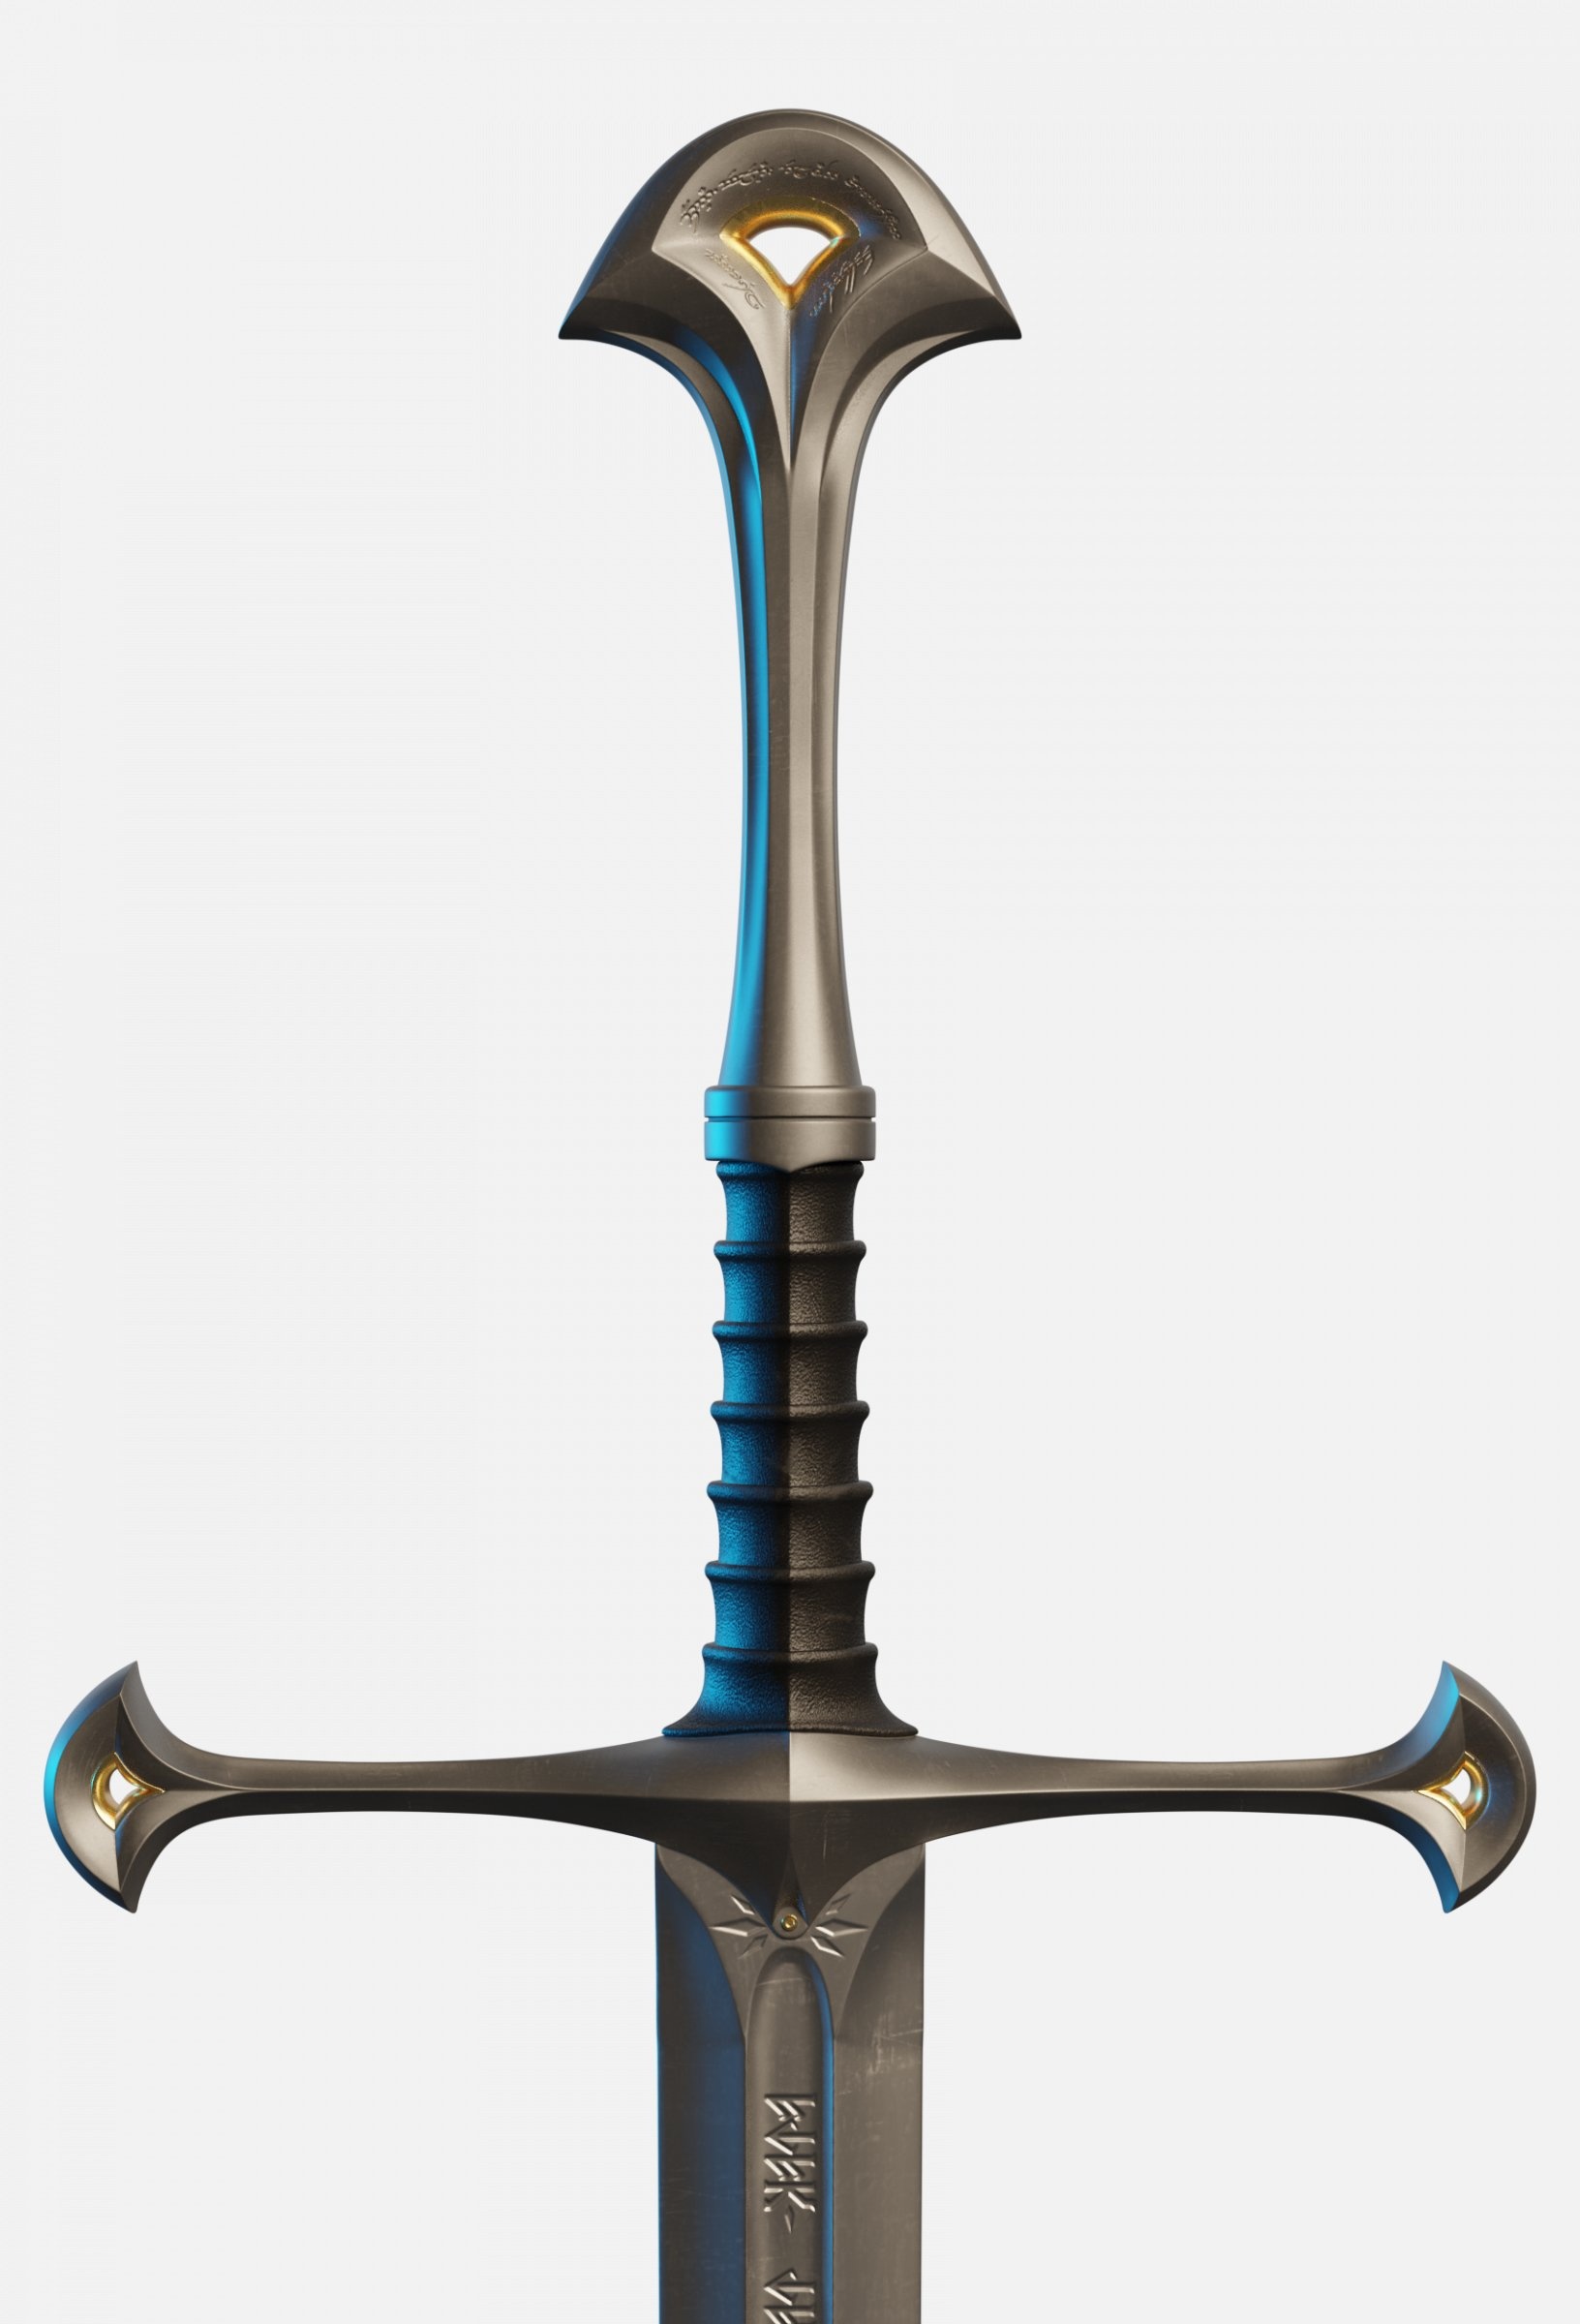 Narsil Sword, Flame of the West, 3D model download, Exquisite craftsmanship, 1640x2400 HD Handy